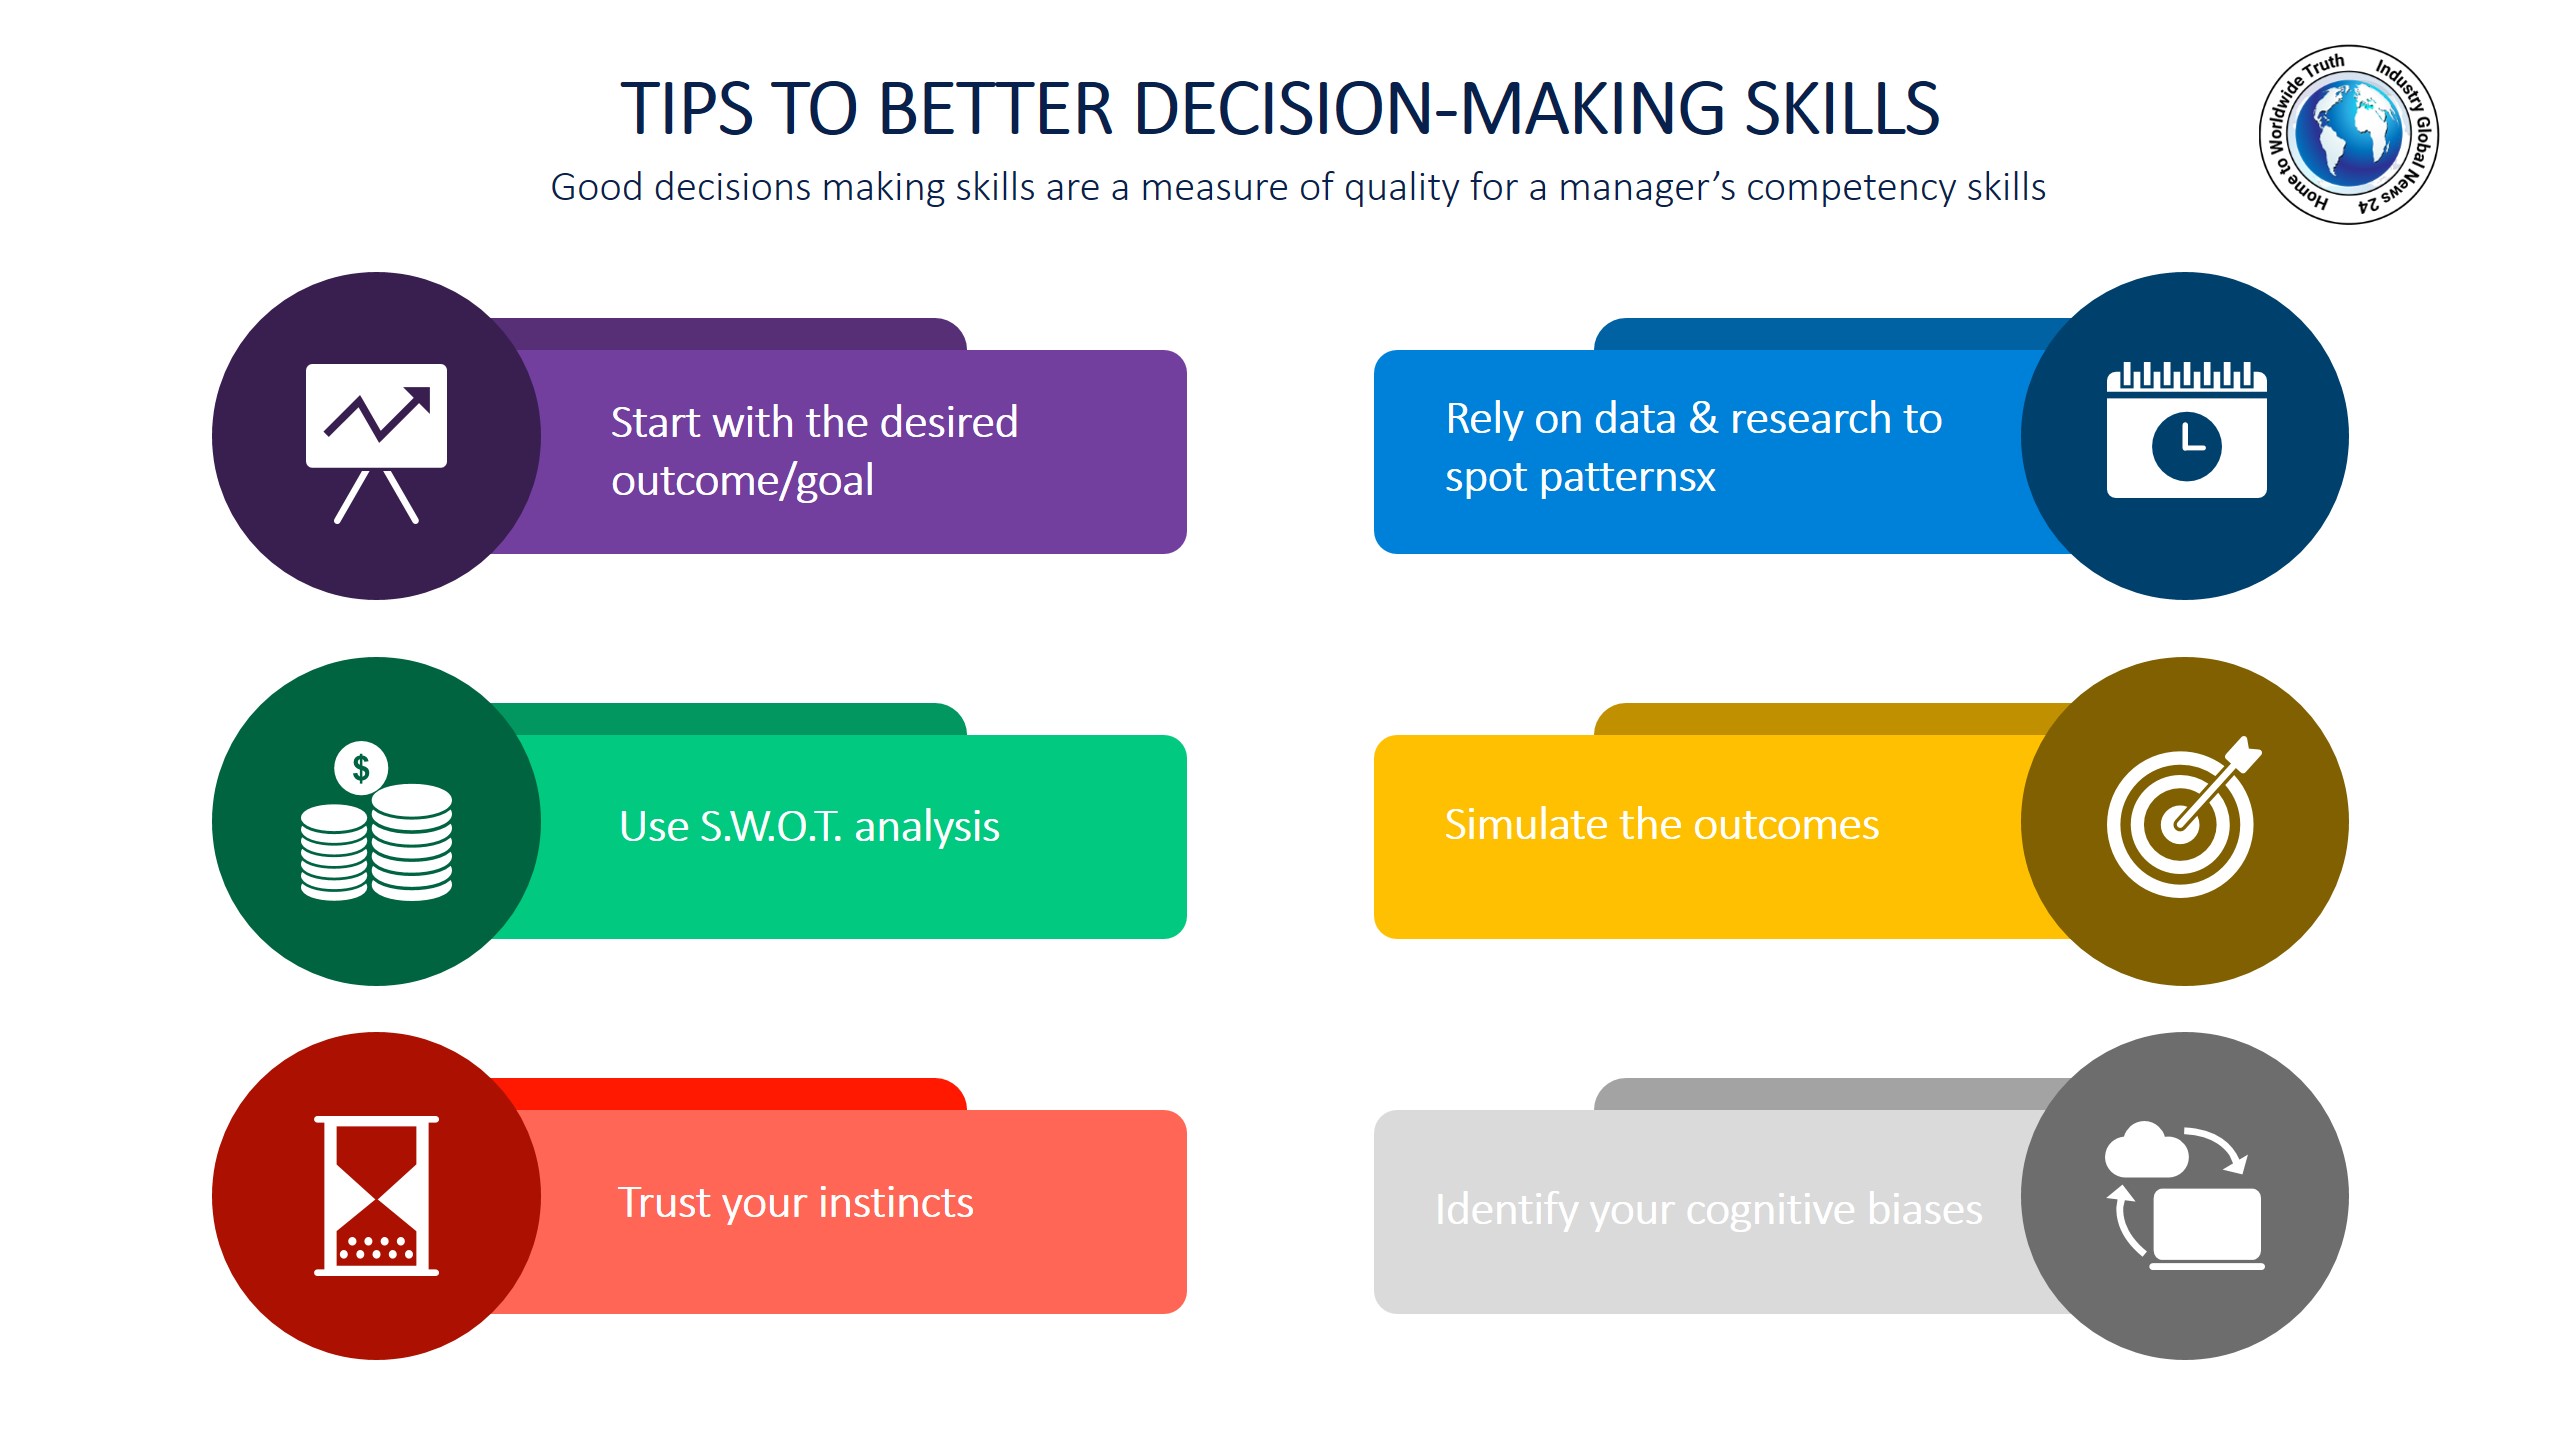 Tips to better decision-making skills